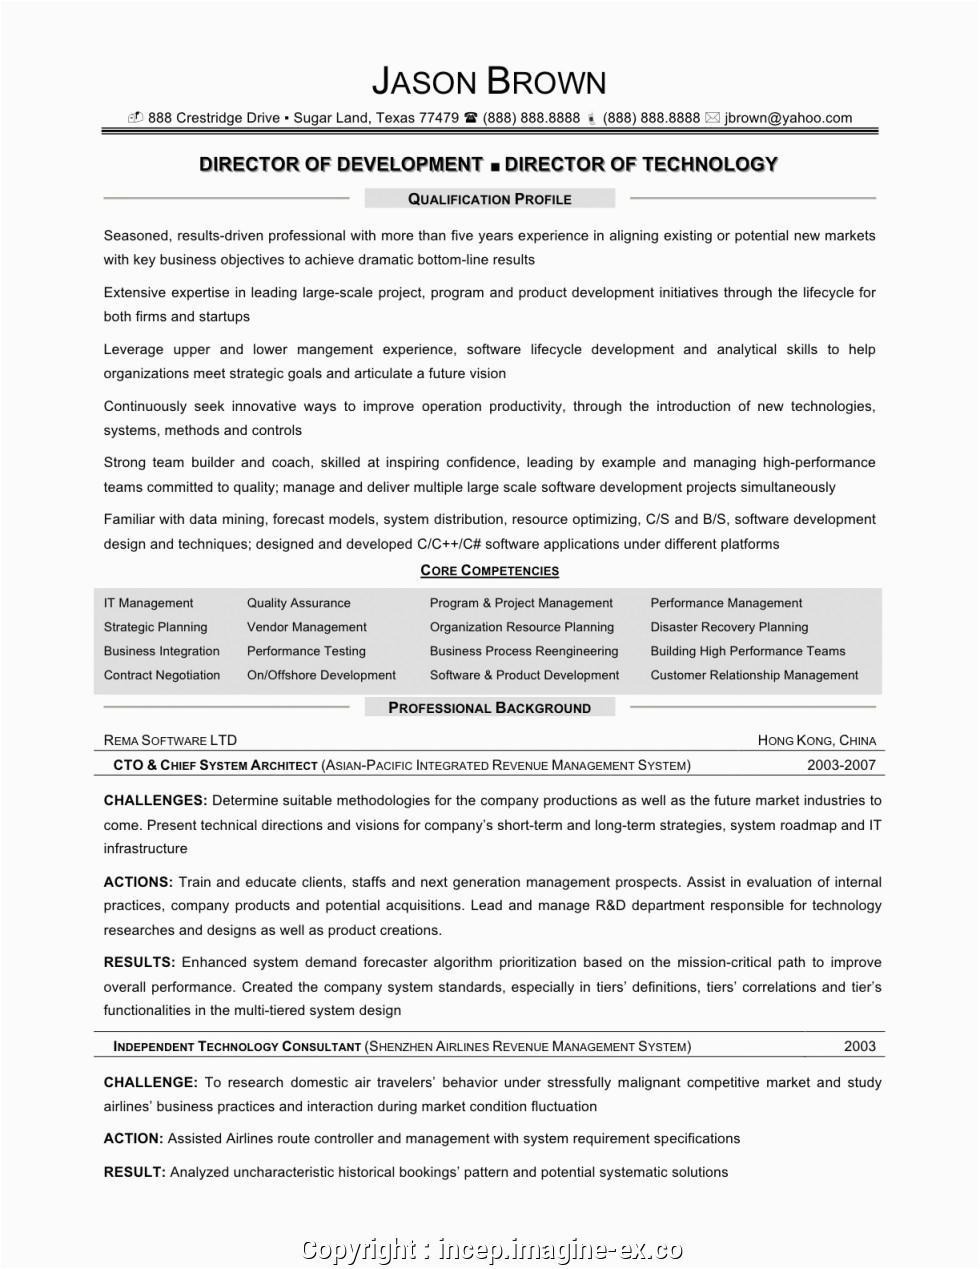 Director Of Information Technology Resume Sample Downloadable Information Technology Director Resume